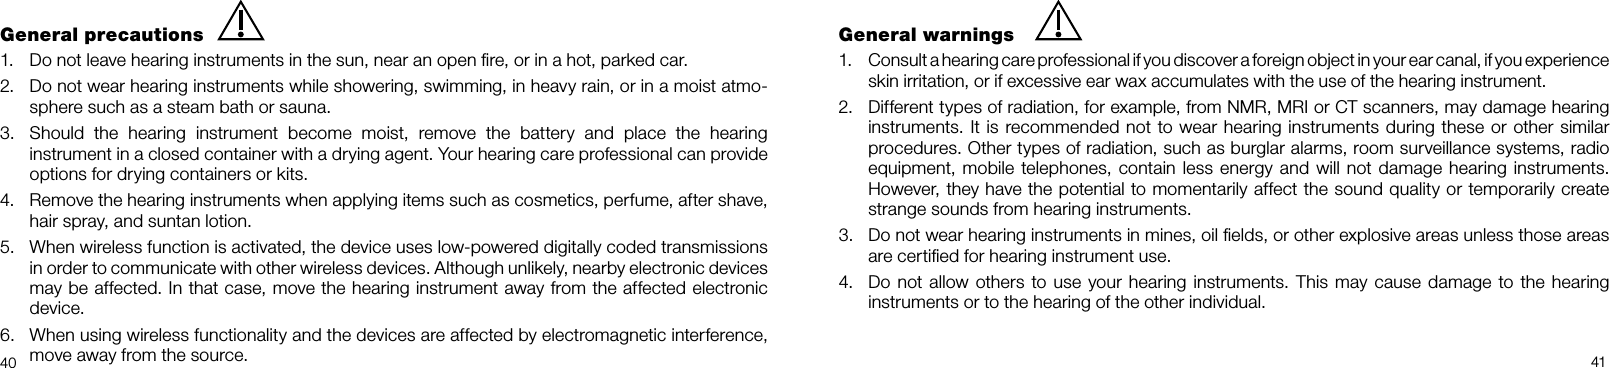   40 41General precautions1.  Do not leave hearing instruments in the sun, near an open ﬁre, or in a hot, parked car.2.  Do not wear hearing instruments while showering, swimming, in heavy rain, or in a moist atmo-sphere such as a steam bath or sauna.3.  Should the hearing instrument become moist, remove the battery and place the hearing instrument in a closed container with a drying agent. Your hearing care professional can provide options for drying containers or kits.4.  Remove the hearing instruments when applying items such as cosmetics, perfume, after shave, hair spray, and suntan lotion. 5.  When wireless function is activated, the device uses low-powered digitally coded transmissions in order to communicate with other wireless devices. Although unlikely, nearby electronic devices may be affected. In that case, move the hearing instrument away from the affected electronic device.6.  When using wireless functionality and the devices are affected by electromagnetic interference, move away from the source.General warnings1.  Consult a hearing care professional if you discover a foreign object in your ear canal, if you experience skin irritation, or if excessive ear wax accumulates with the use of the hearing instrument. 2.  Different types of radiation, for example, from NMR, MRI or CT scanners, may damage hearing instruments. It is recommended not to wear hearing instruments during these or other similar procedures. Other types of radiation, such as burglar alarms, room surveillance systems, radio equipment, mobile telephones, contain less energy and will not damage hearing instruments. However, they have the potential to momentarily affect the sound quality or temporarily create strange sounds from hearing instruments.3.  Do not wear hearing instruments in mines, oil ﬁelds, or other explosive areas unless those areas are certiﬁed for hearing instrument use.4.  Do not allow others to use your hearing instruments. This may cause damage to the hearing  instruments or to the hearing of the other individual.